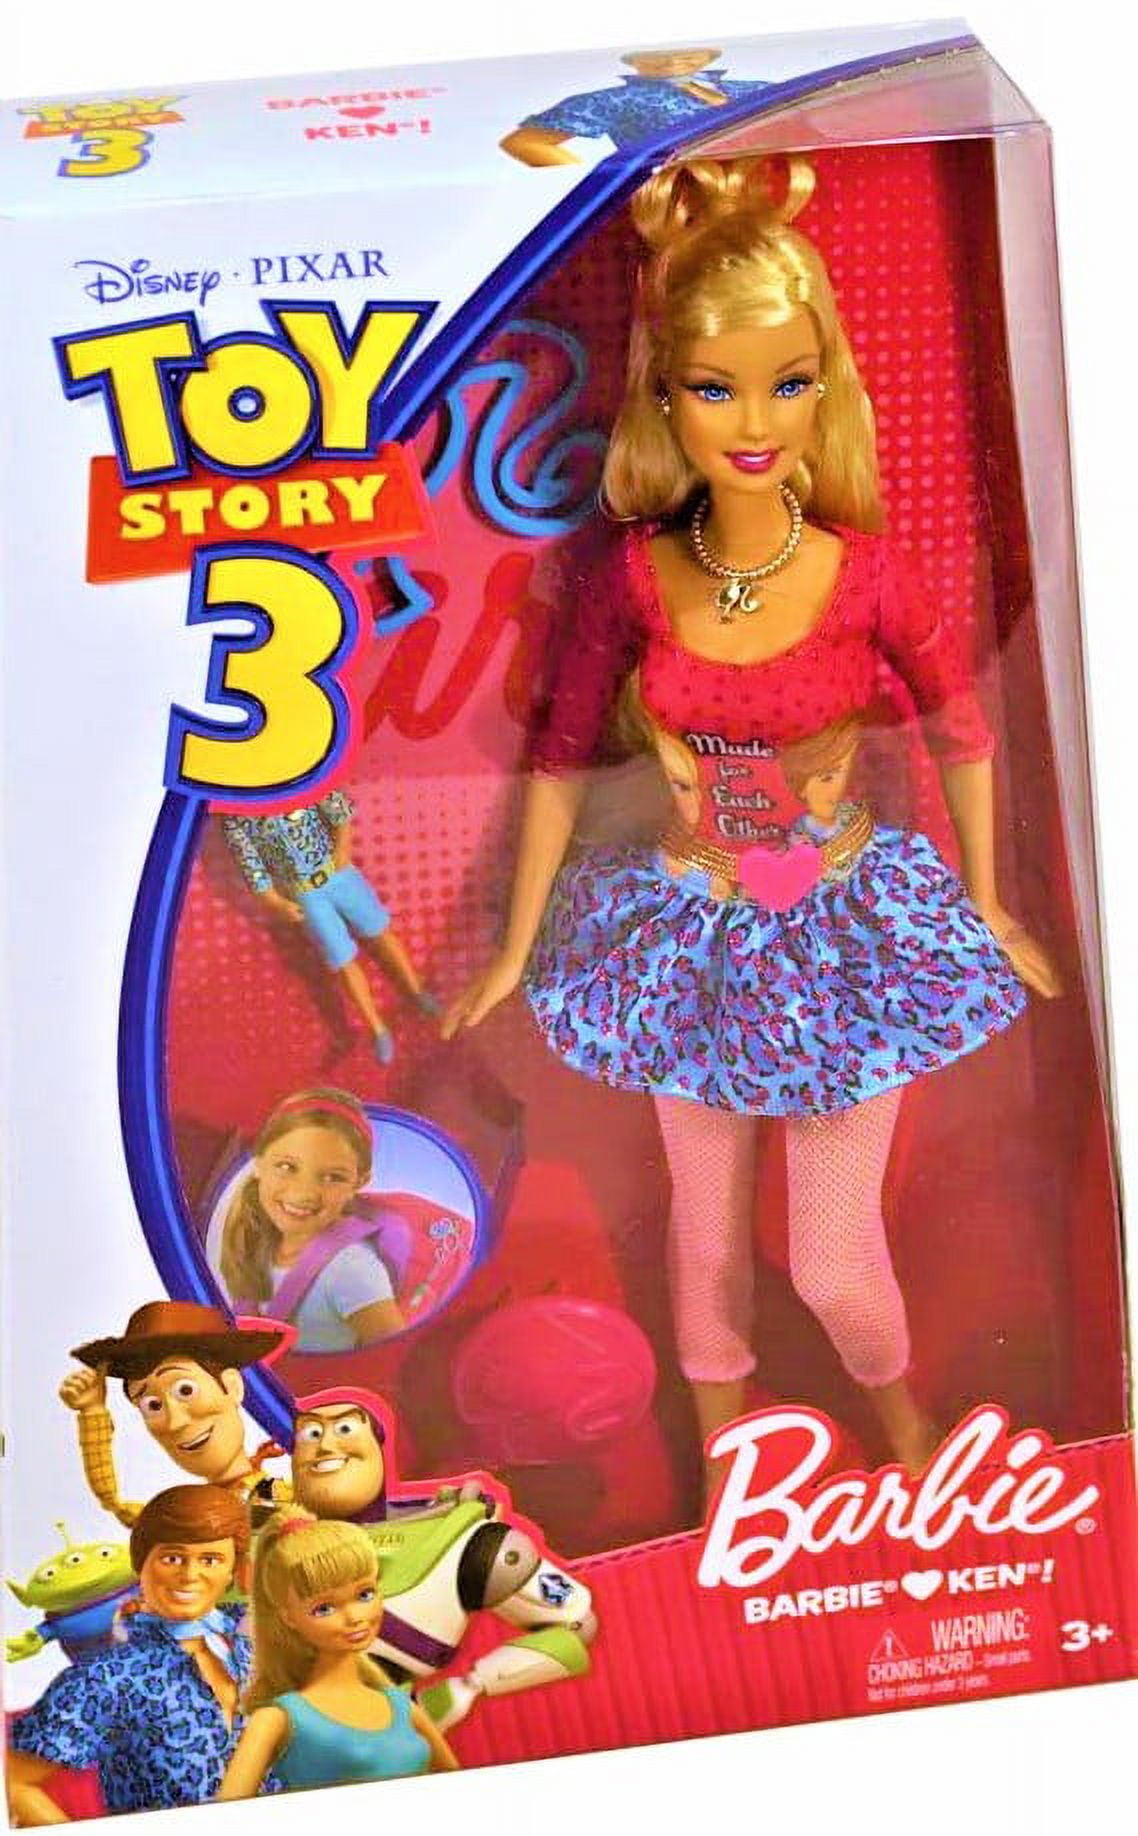 Toy Story 3 Barbie Loves Ken Fashion Doll